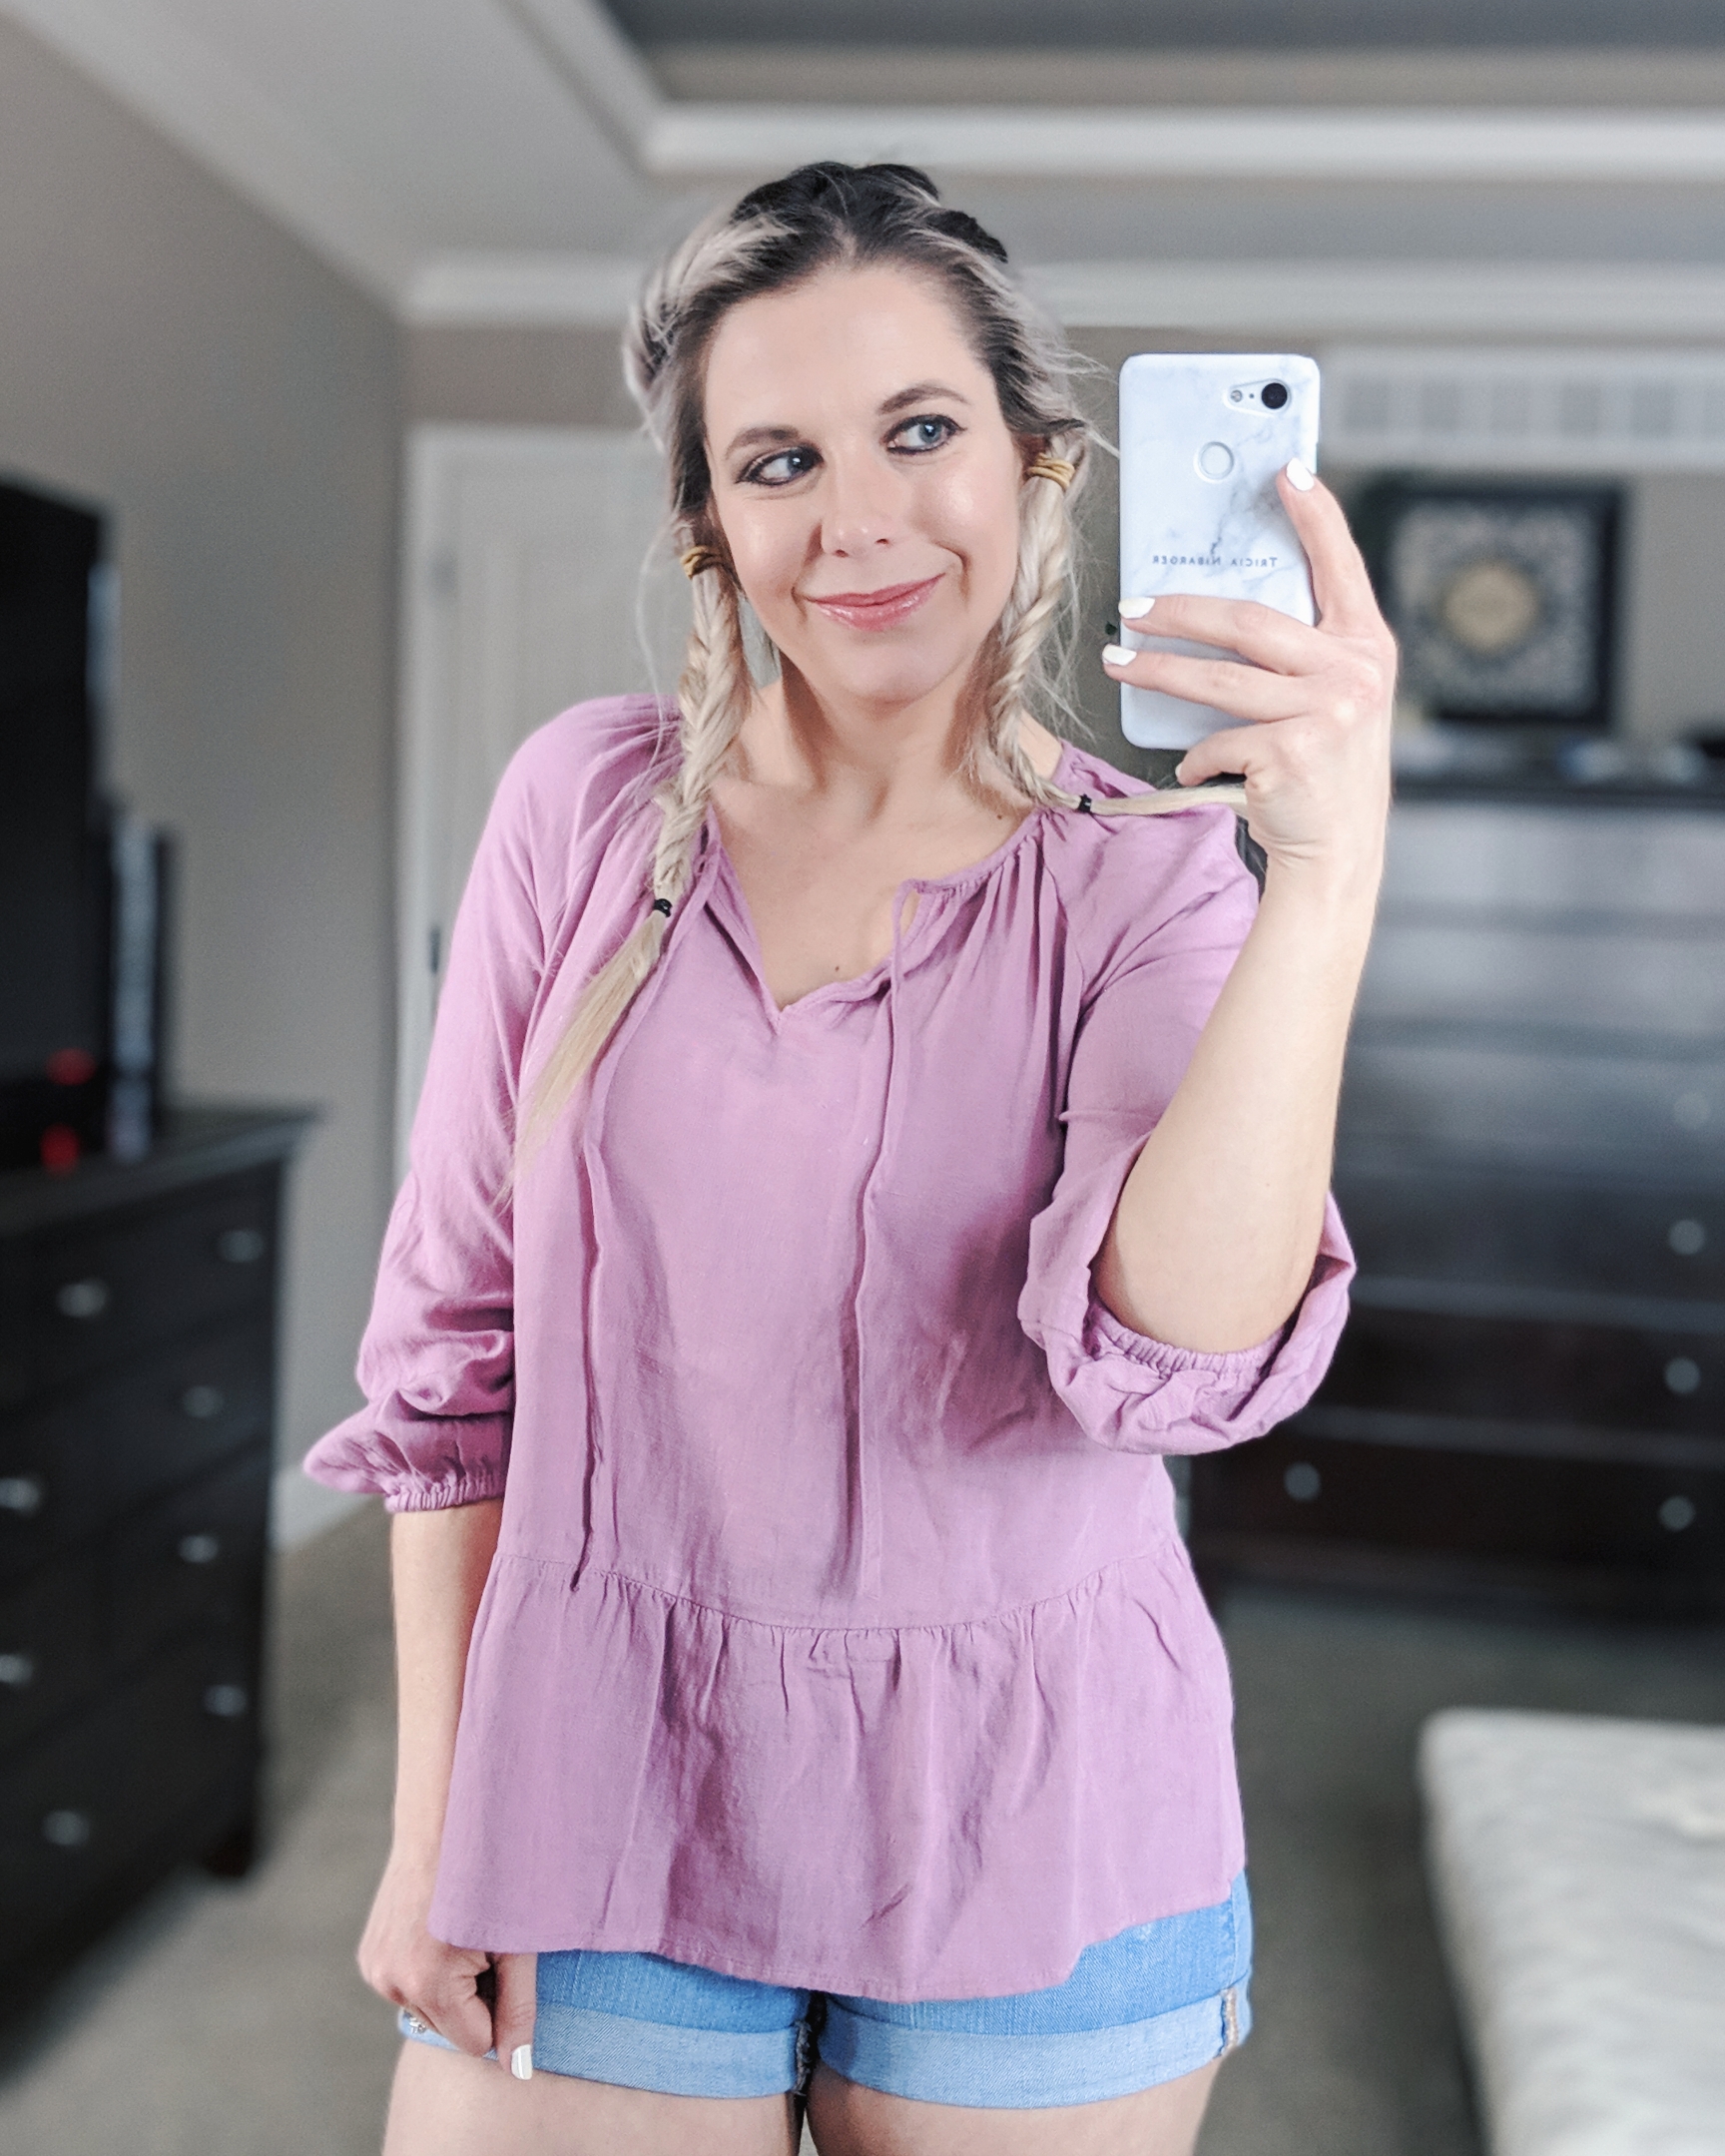 Old Navy Try On Haul Spring 2019: The best pieces from Old Navy to refresh your closet for Spring 2019! Fashion blogger Tricia Nibarger of COVET by tricia showcases the cutest Old Navy Spring 2019 styles. This Old Navy try on haul includes dresses, jackets, tops, shorts, workout wear, and more! #oldnavy #liketkit #tryon #haul